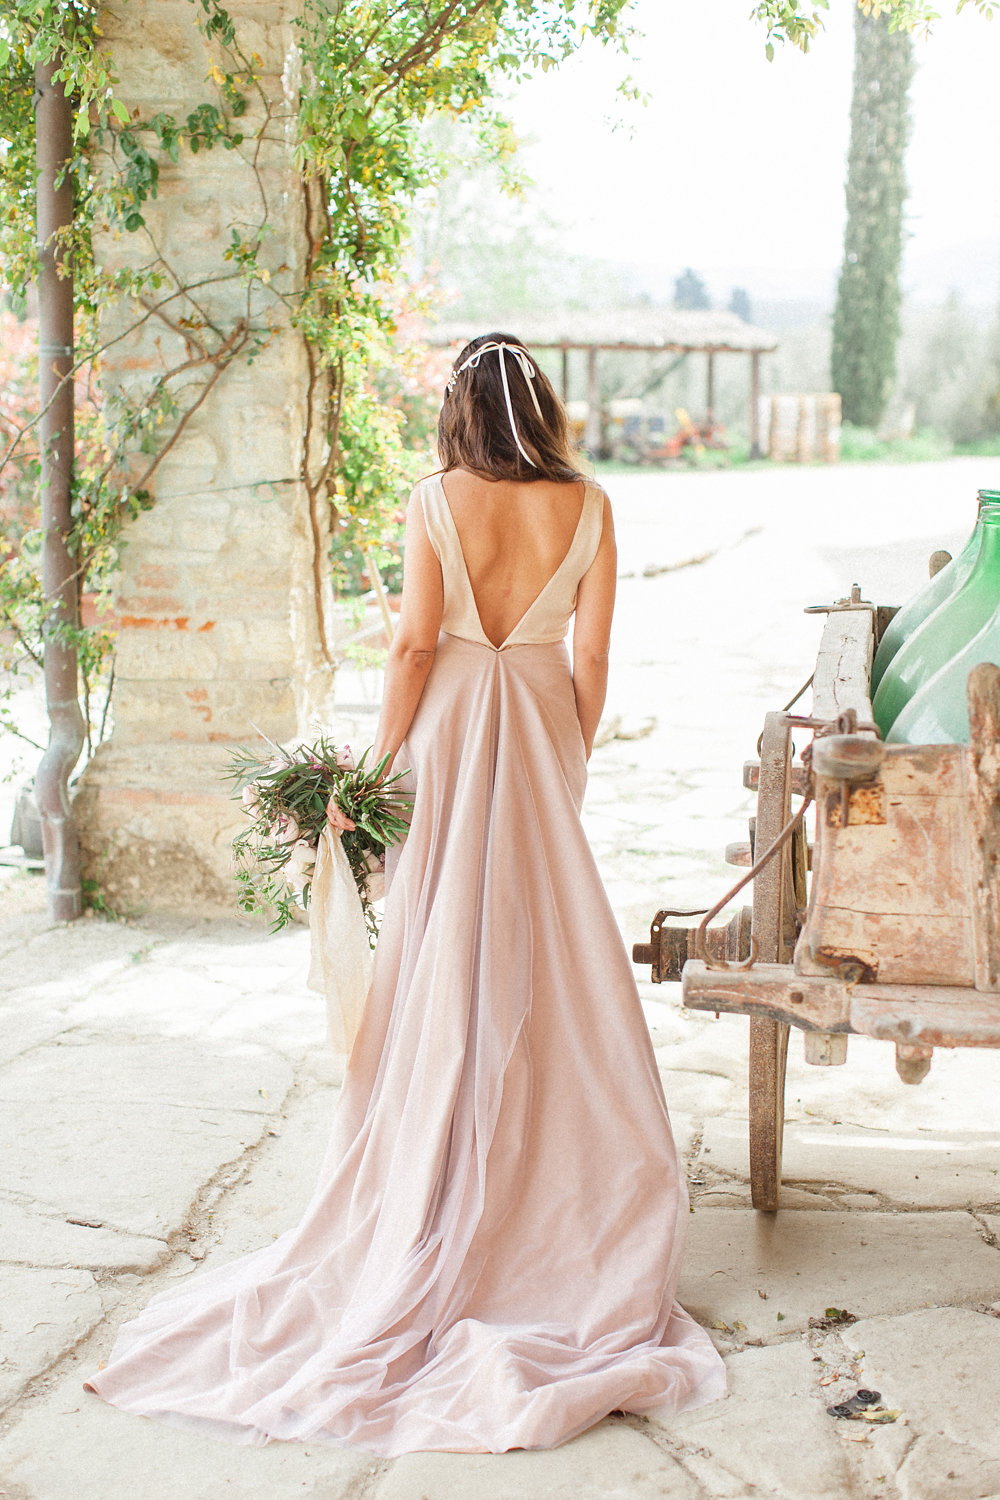 Blush bespoke bridal gown by Louise Made in Italy I adore 